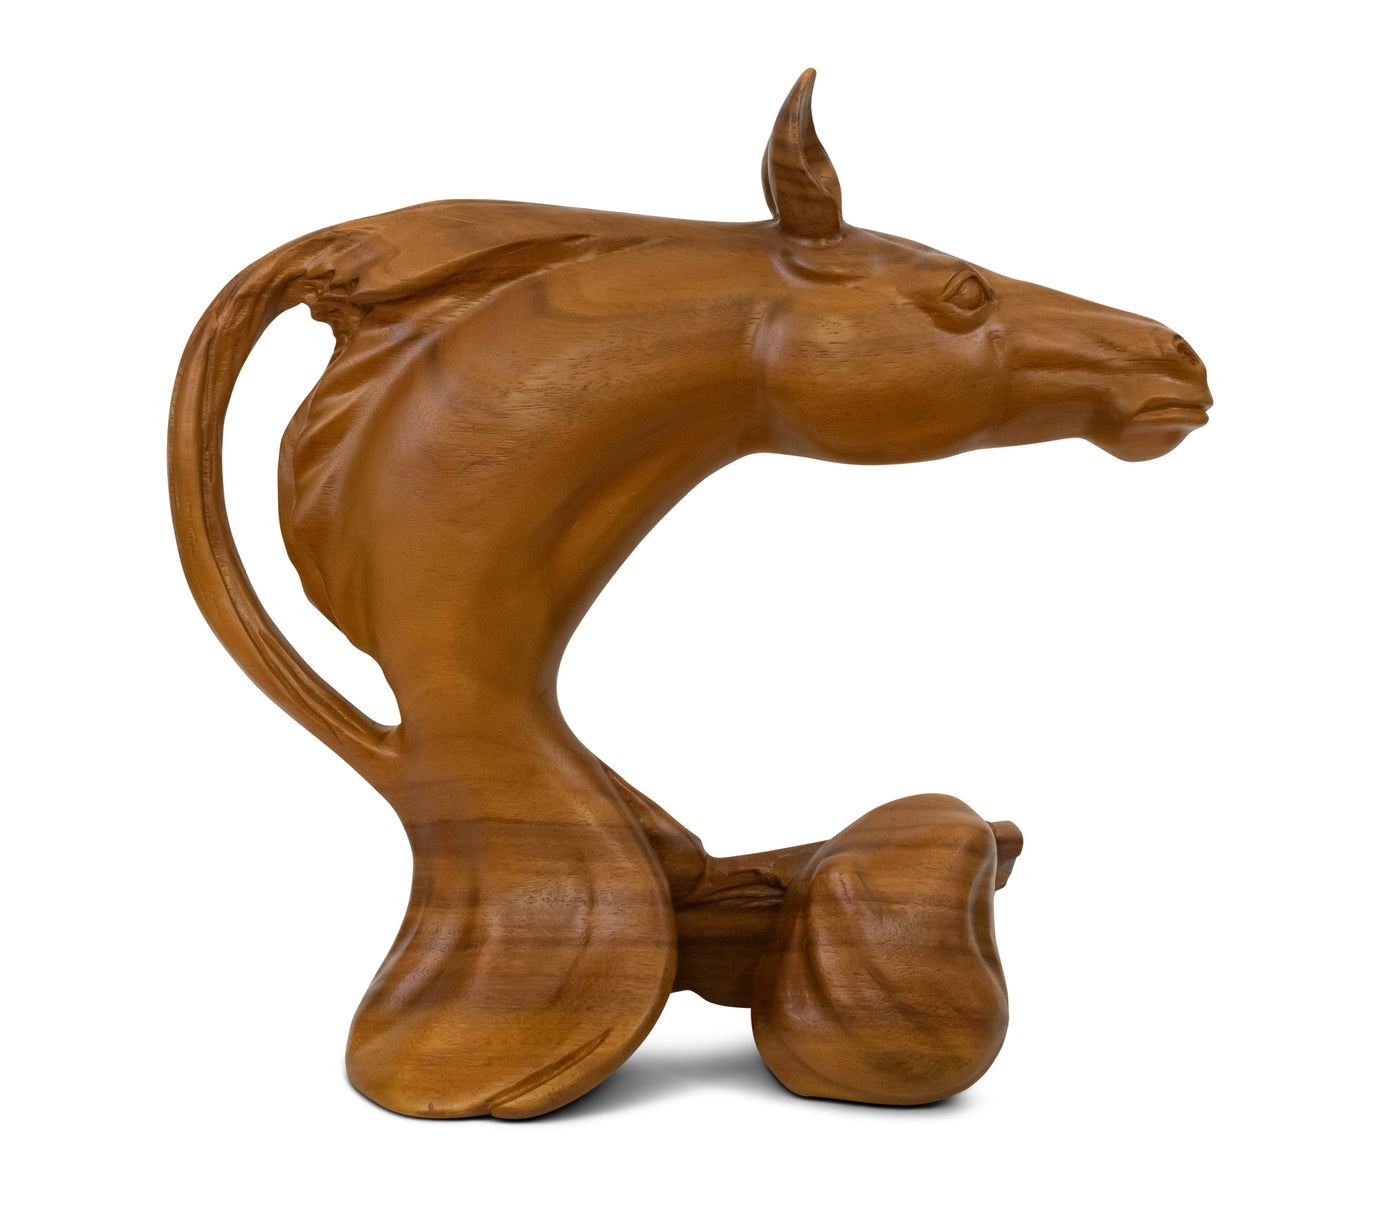 17" Wooden Solid Hand Carved Horse Head Abstract Sculpture Art Statue